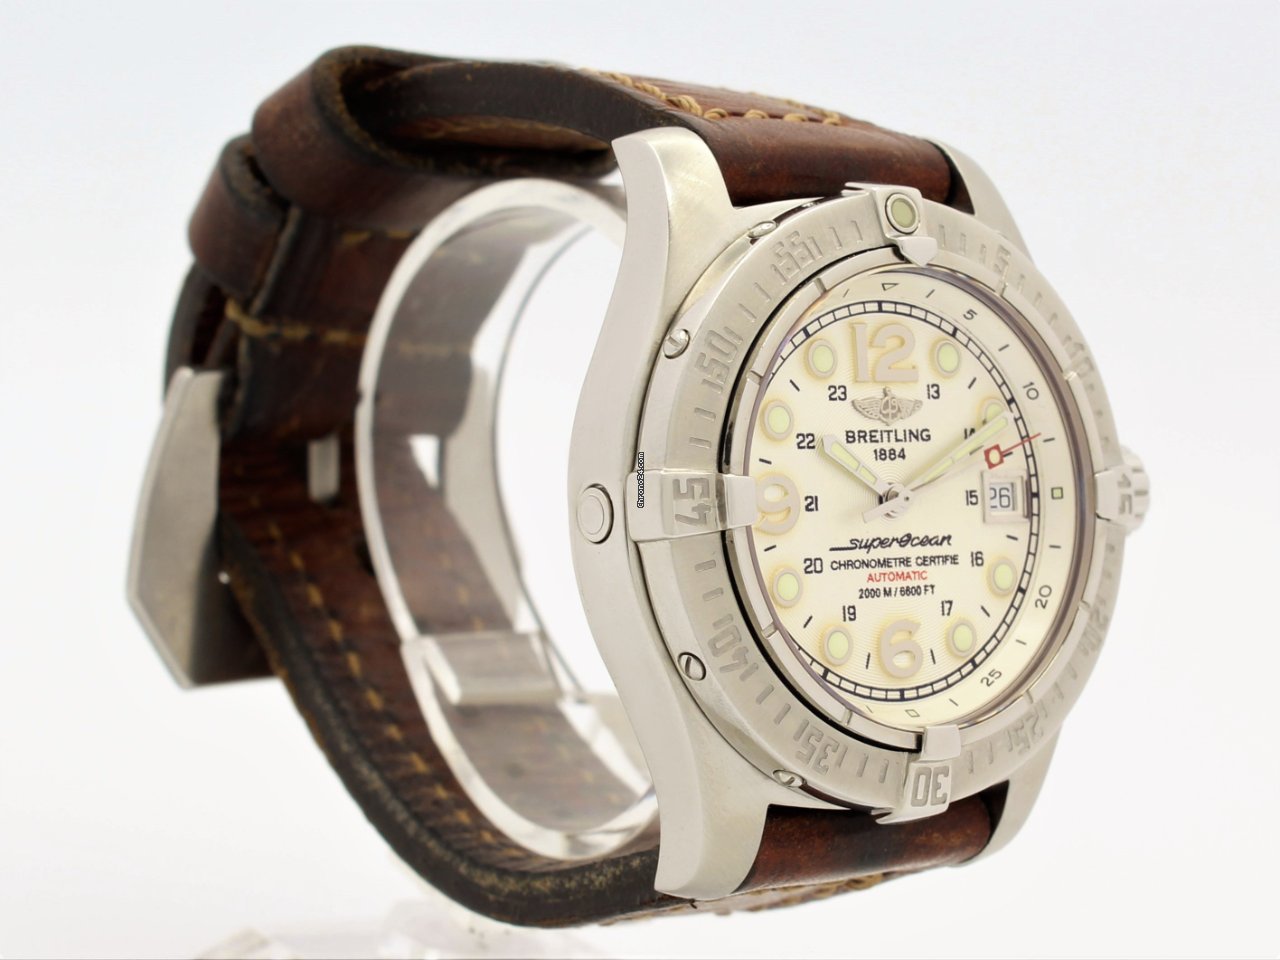 Breitling Colt Automatic 44mm White Dial Brown Leather Strap Mens Watch - A1738811/G791/437X